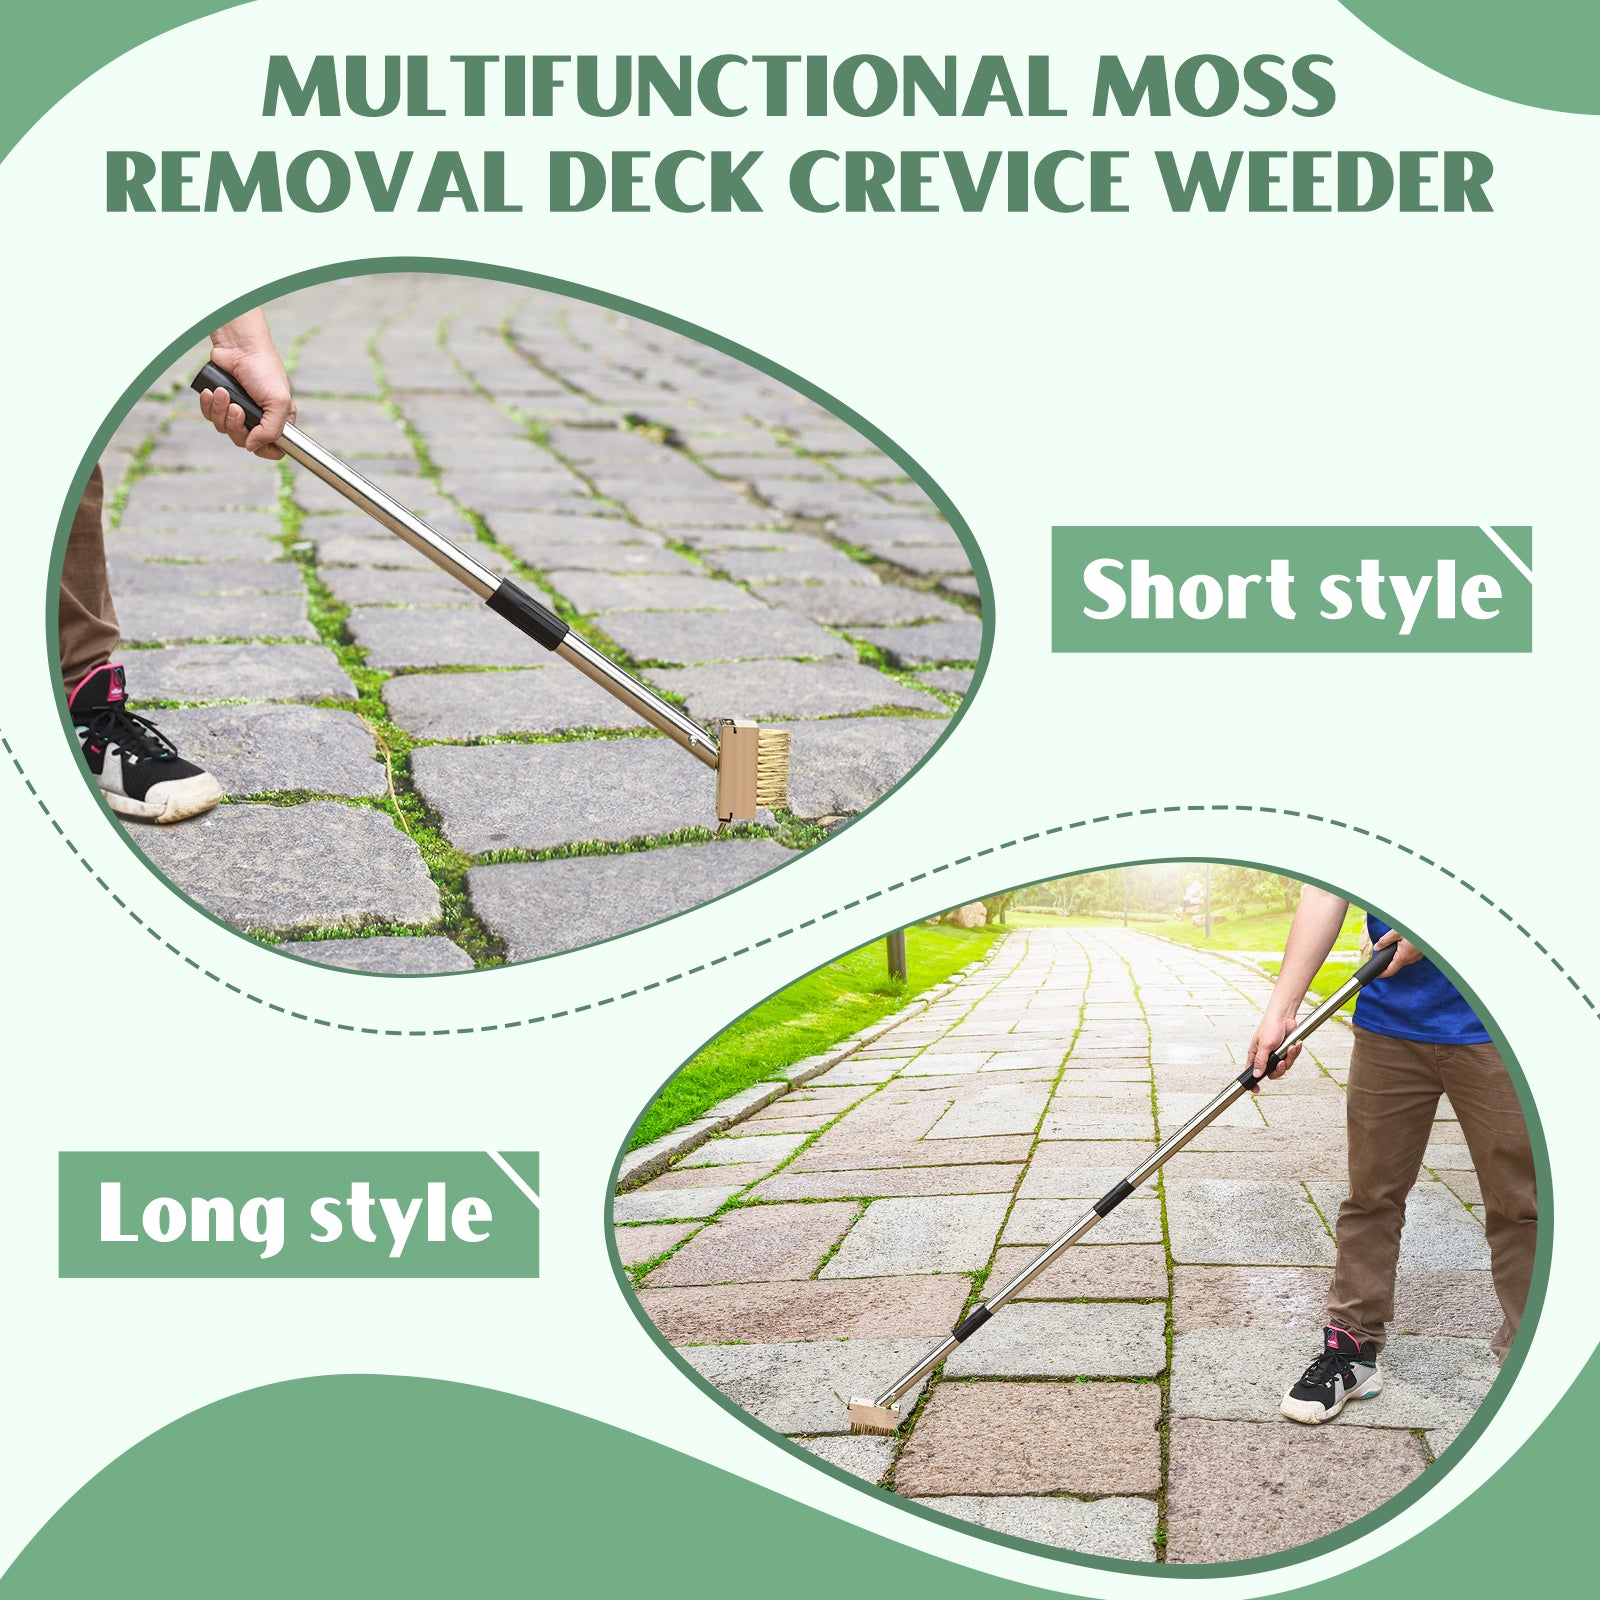 Crack Weeder, Manual Crevice Weeding Tool, Moss Weed Remover Puller Tool Wired Grout Cleaner Brush with Steel Handle for Cleaning Deck, Paver, Patio, Walkway, Driveway Crack - 2 Weed Wire Brush Heads